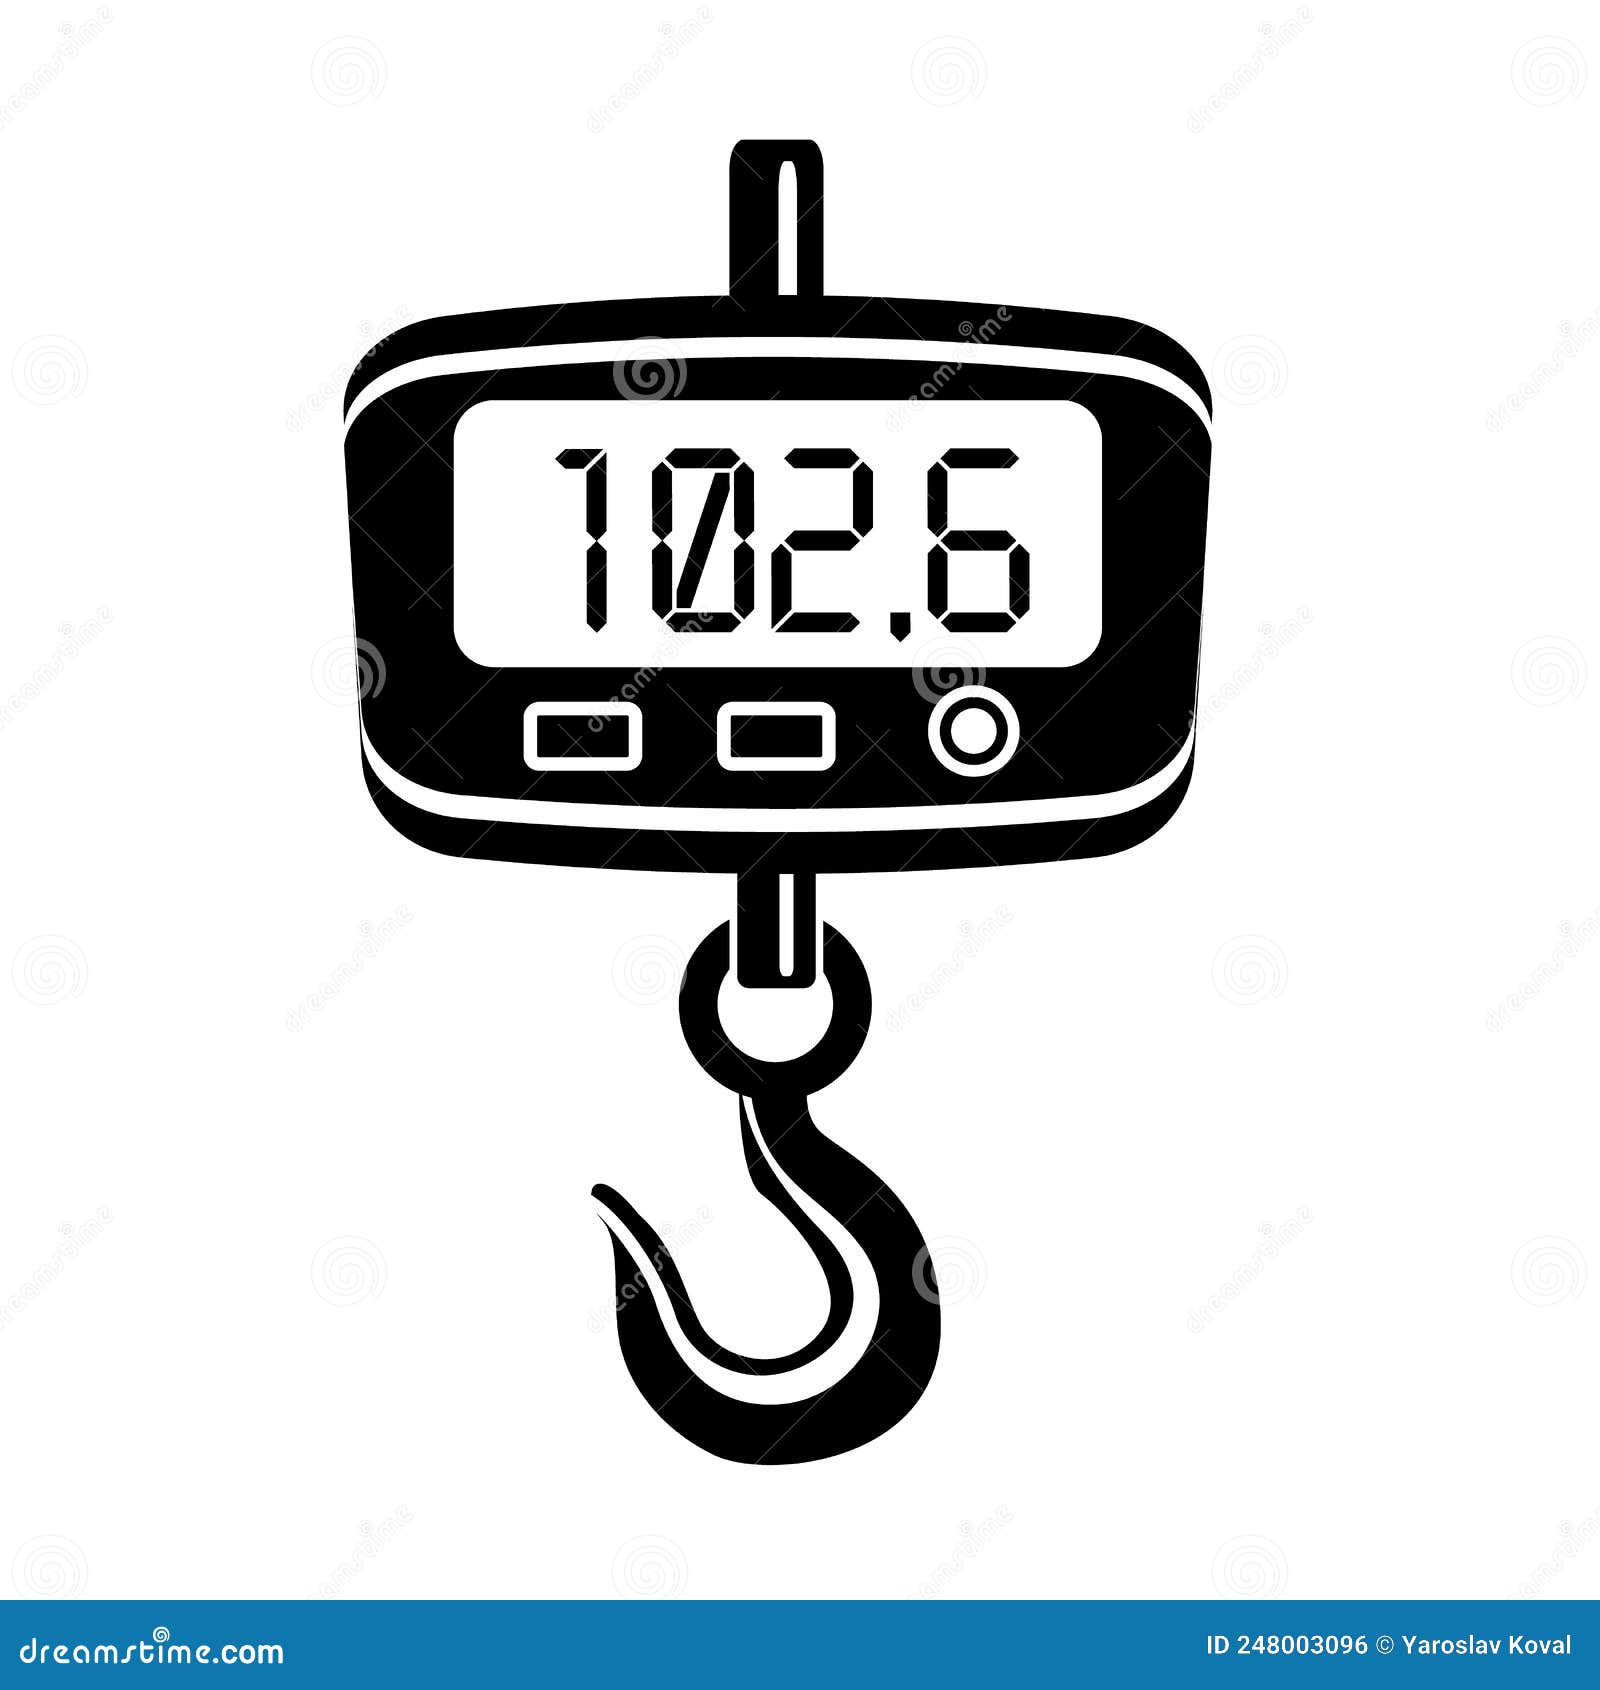 https://thumbs.dreamstime.com/z/scales-display-hook-hanging-load-digital-weight-indicator-measuring-device-meat-shop-trade-simple-style-detailed-248003096.jpg